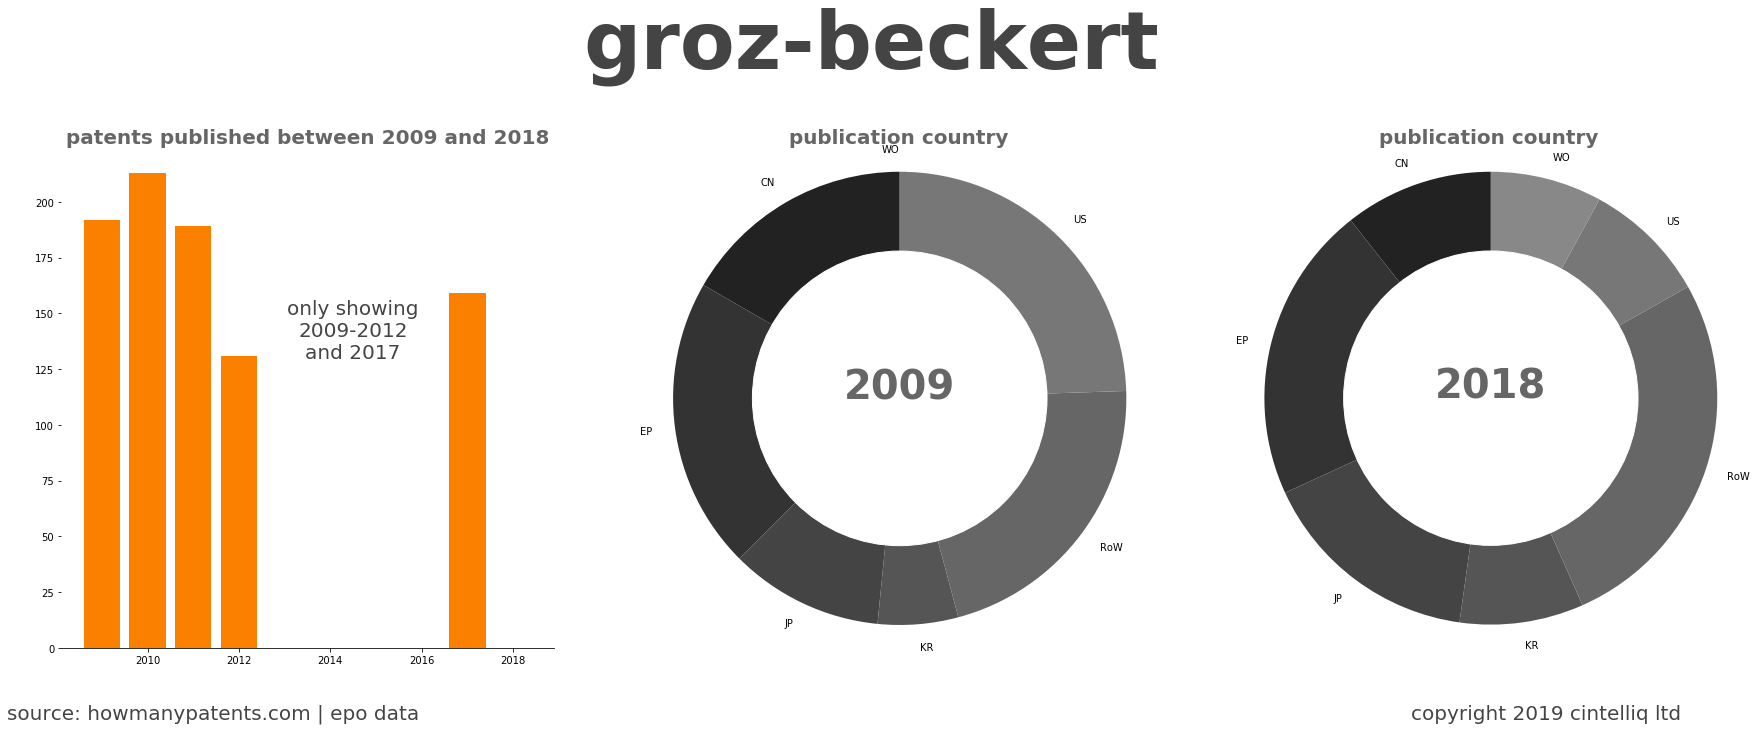 summary of patents for Groz-Beckert